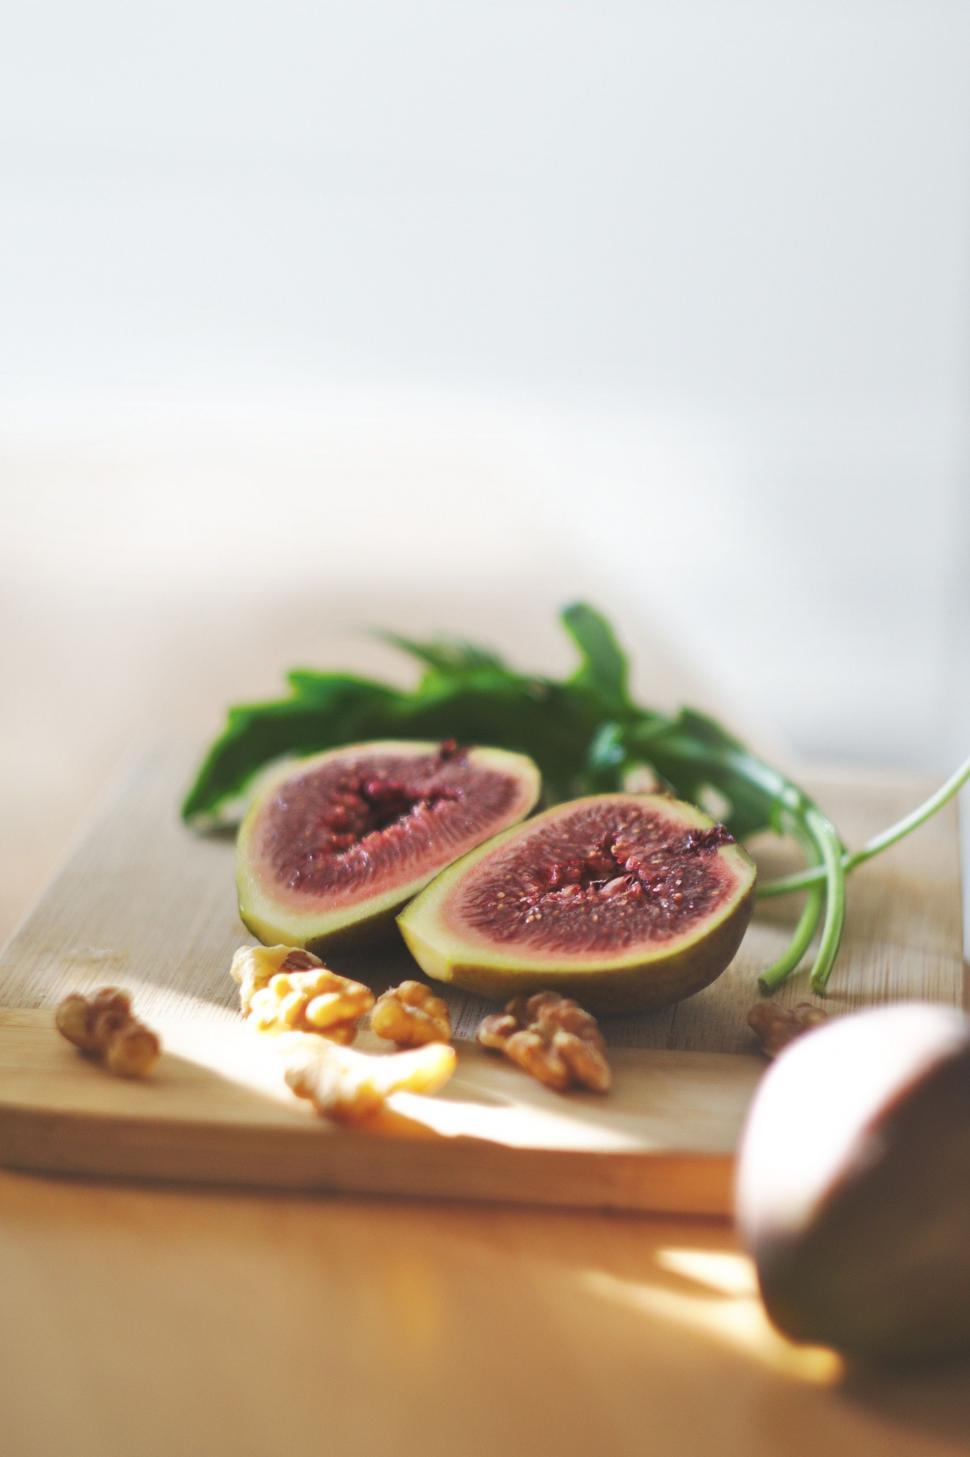 Free Image of Wooden Cutting Board With Figs and Nuts 